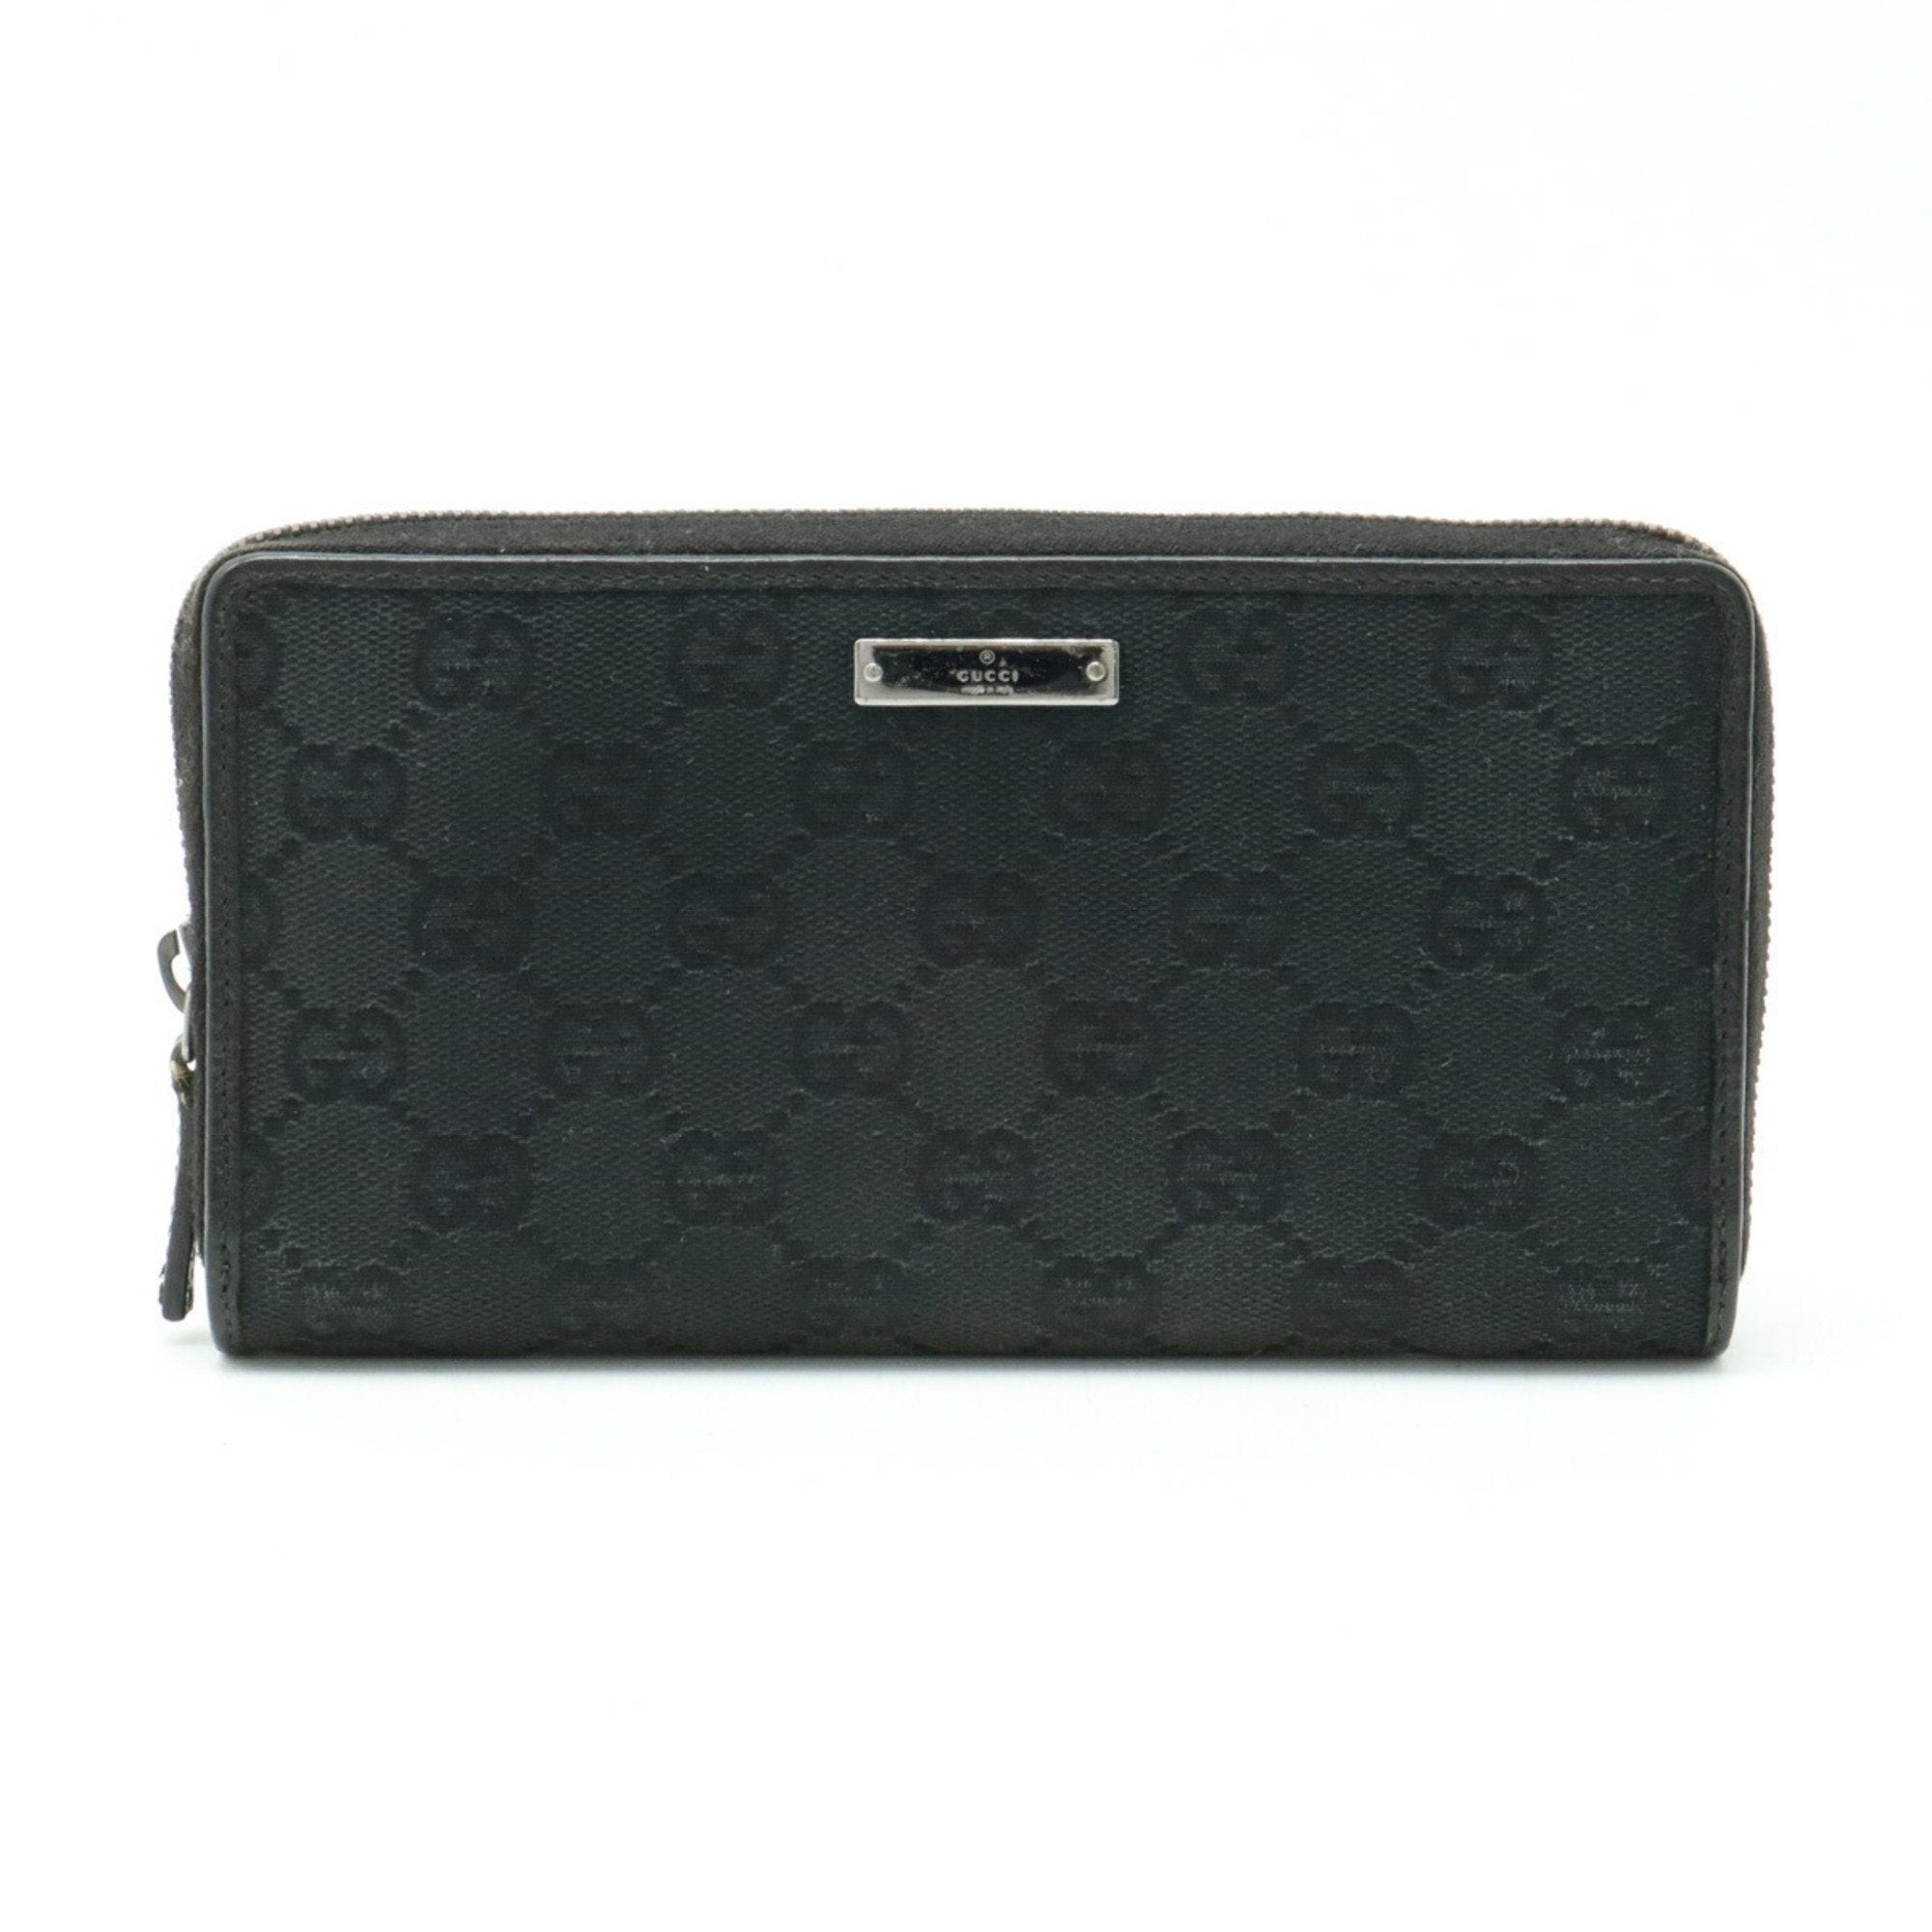 GG Canvas Round Long Wallet Leather Black 112724